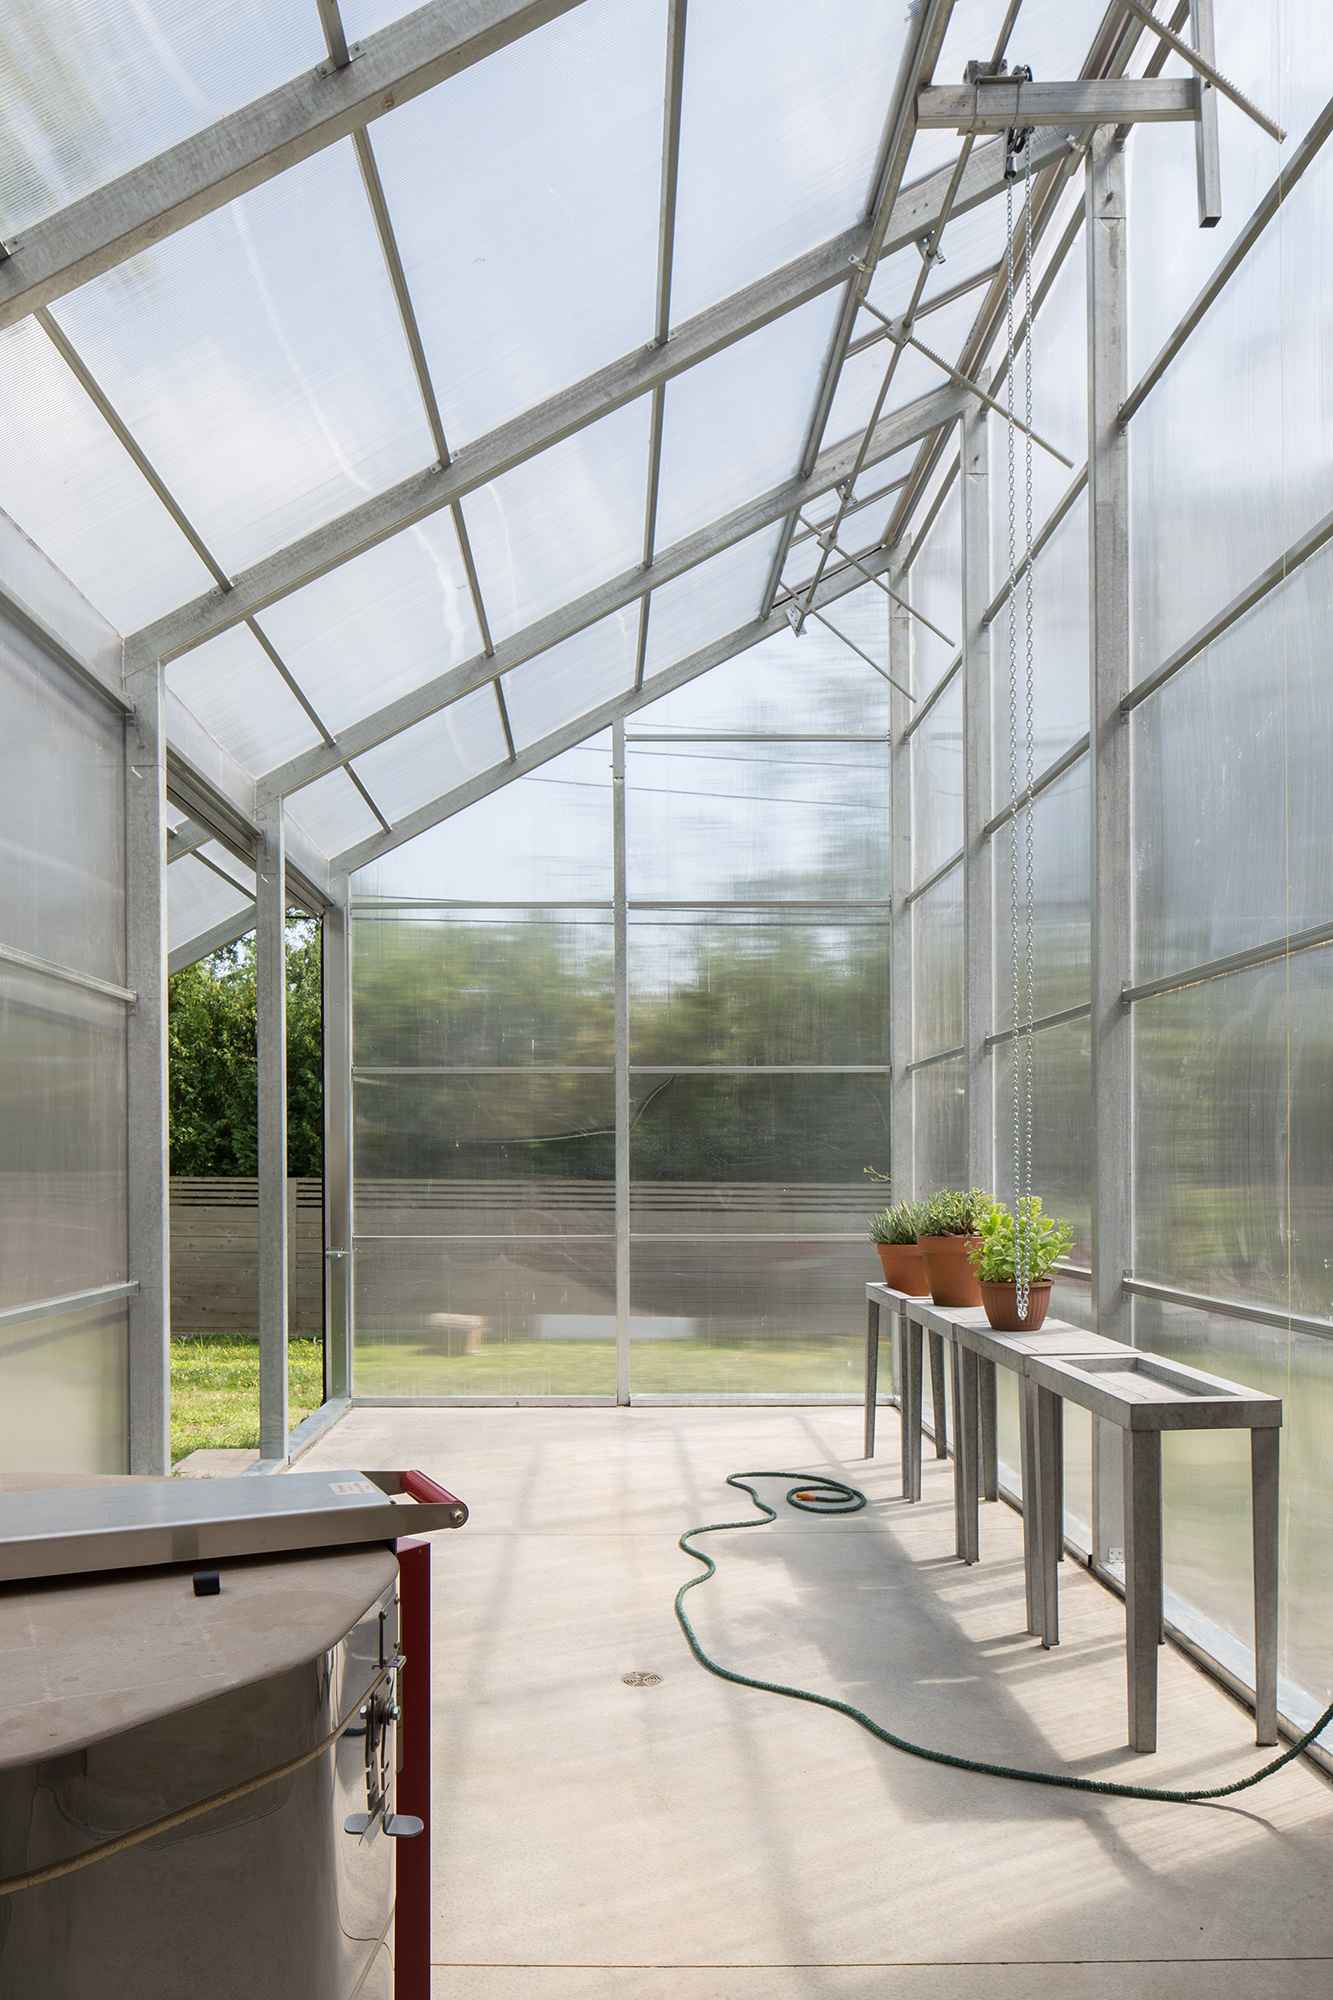 spare interior of a greenhouse structure